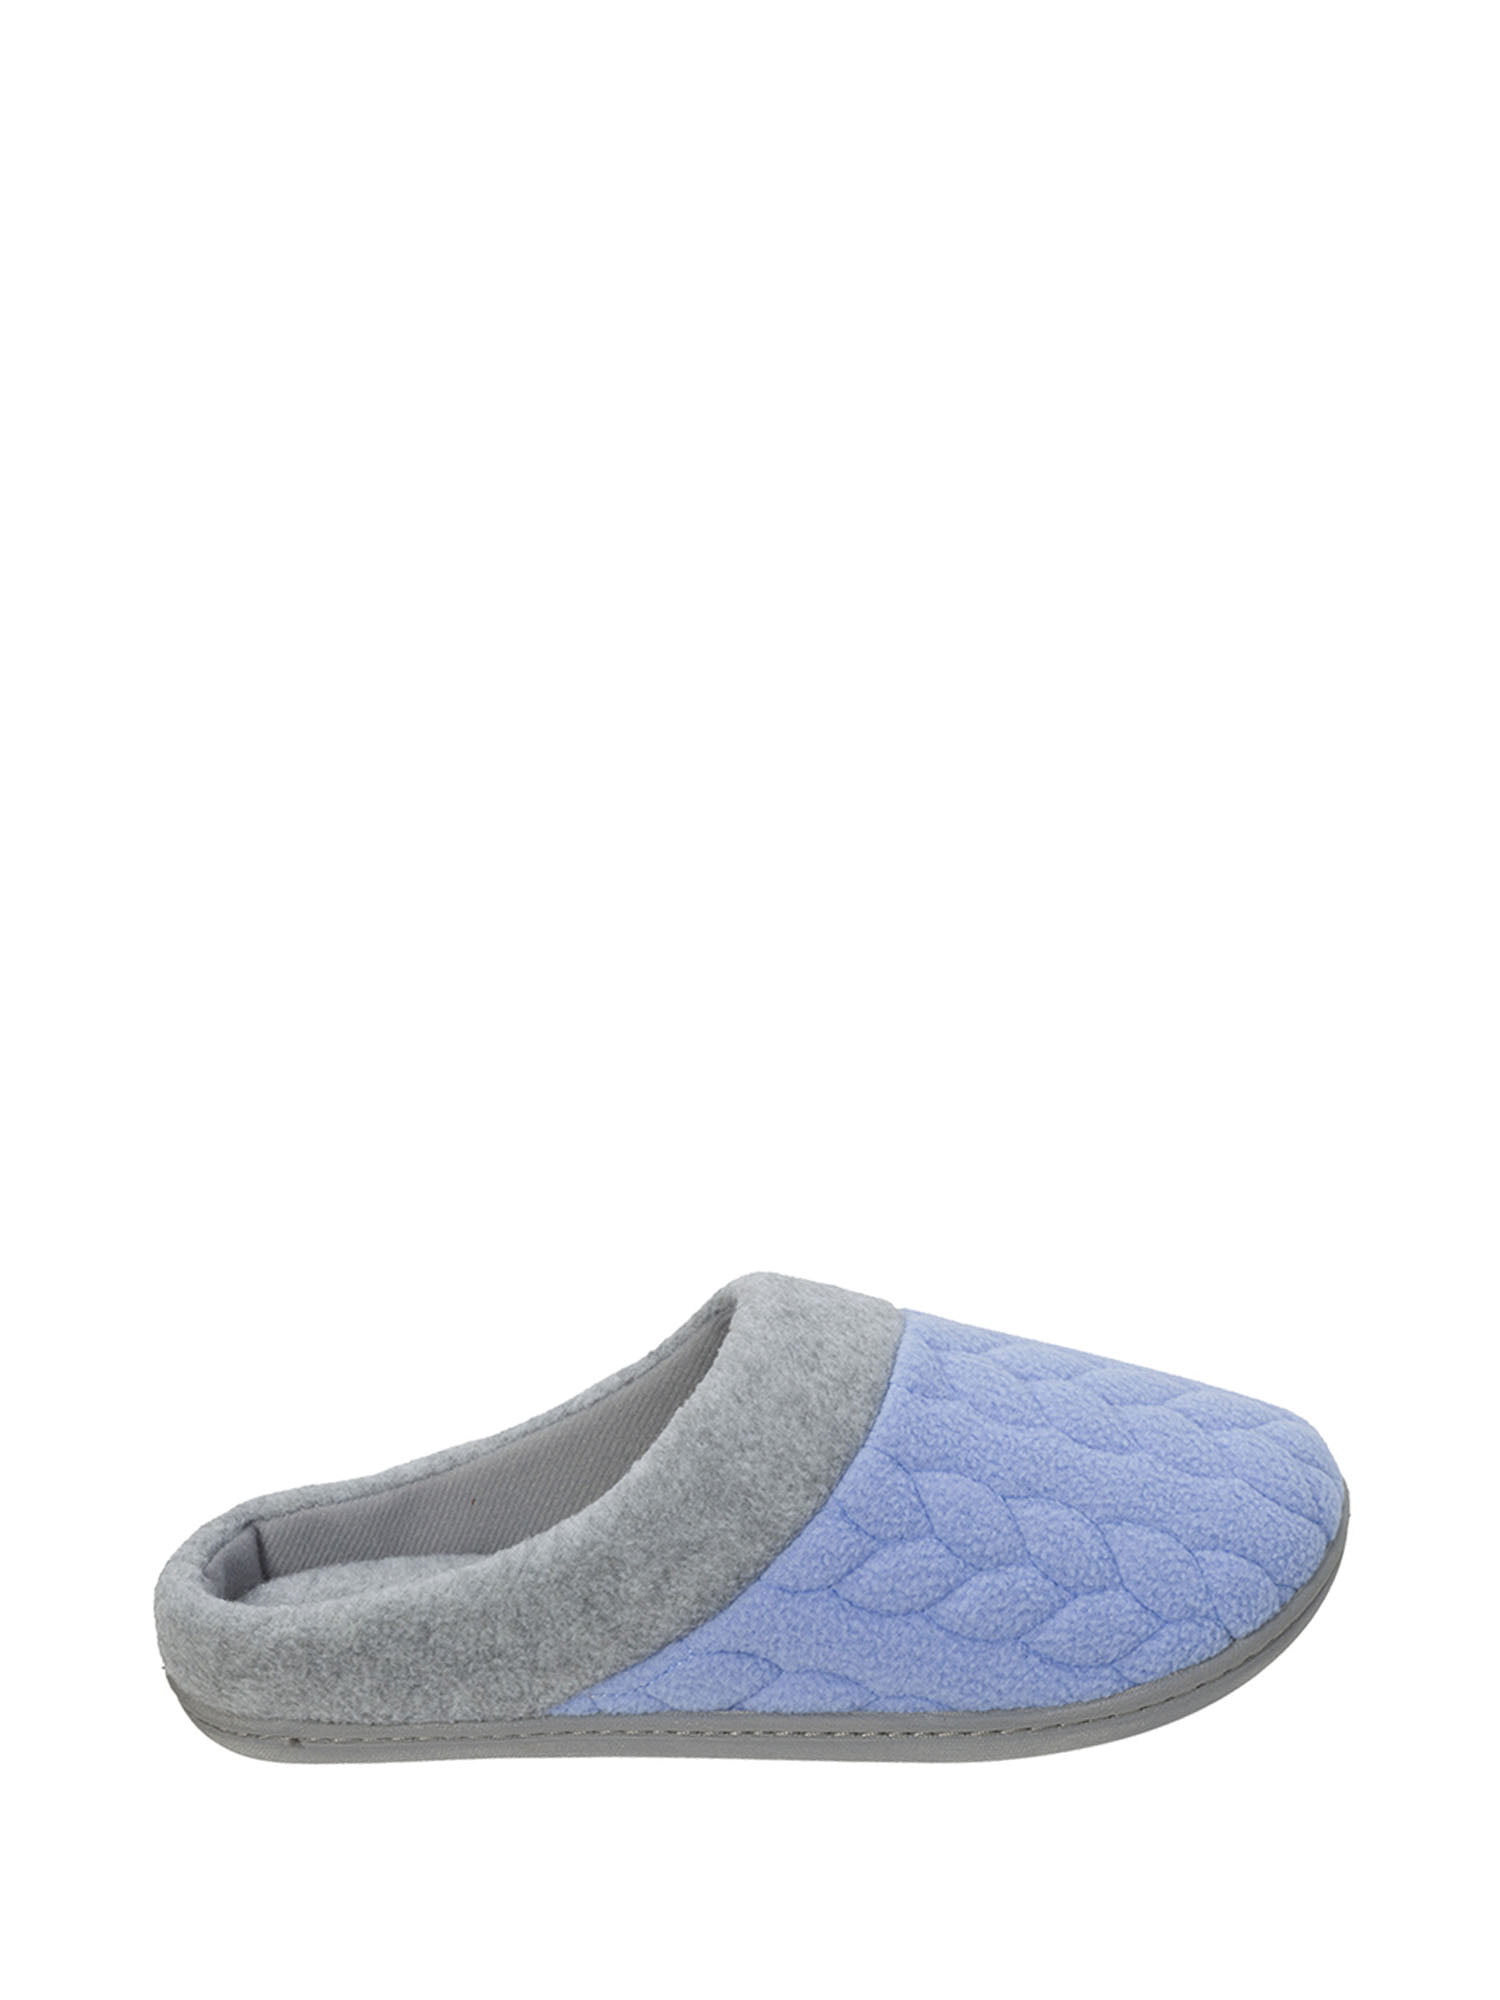 womens enclosed slippers